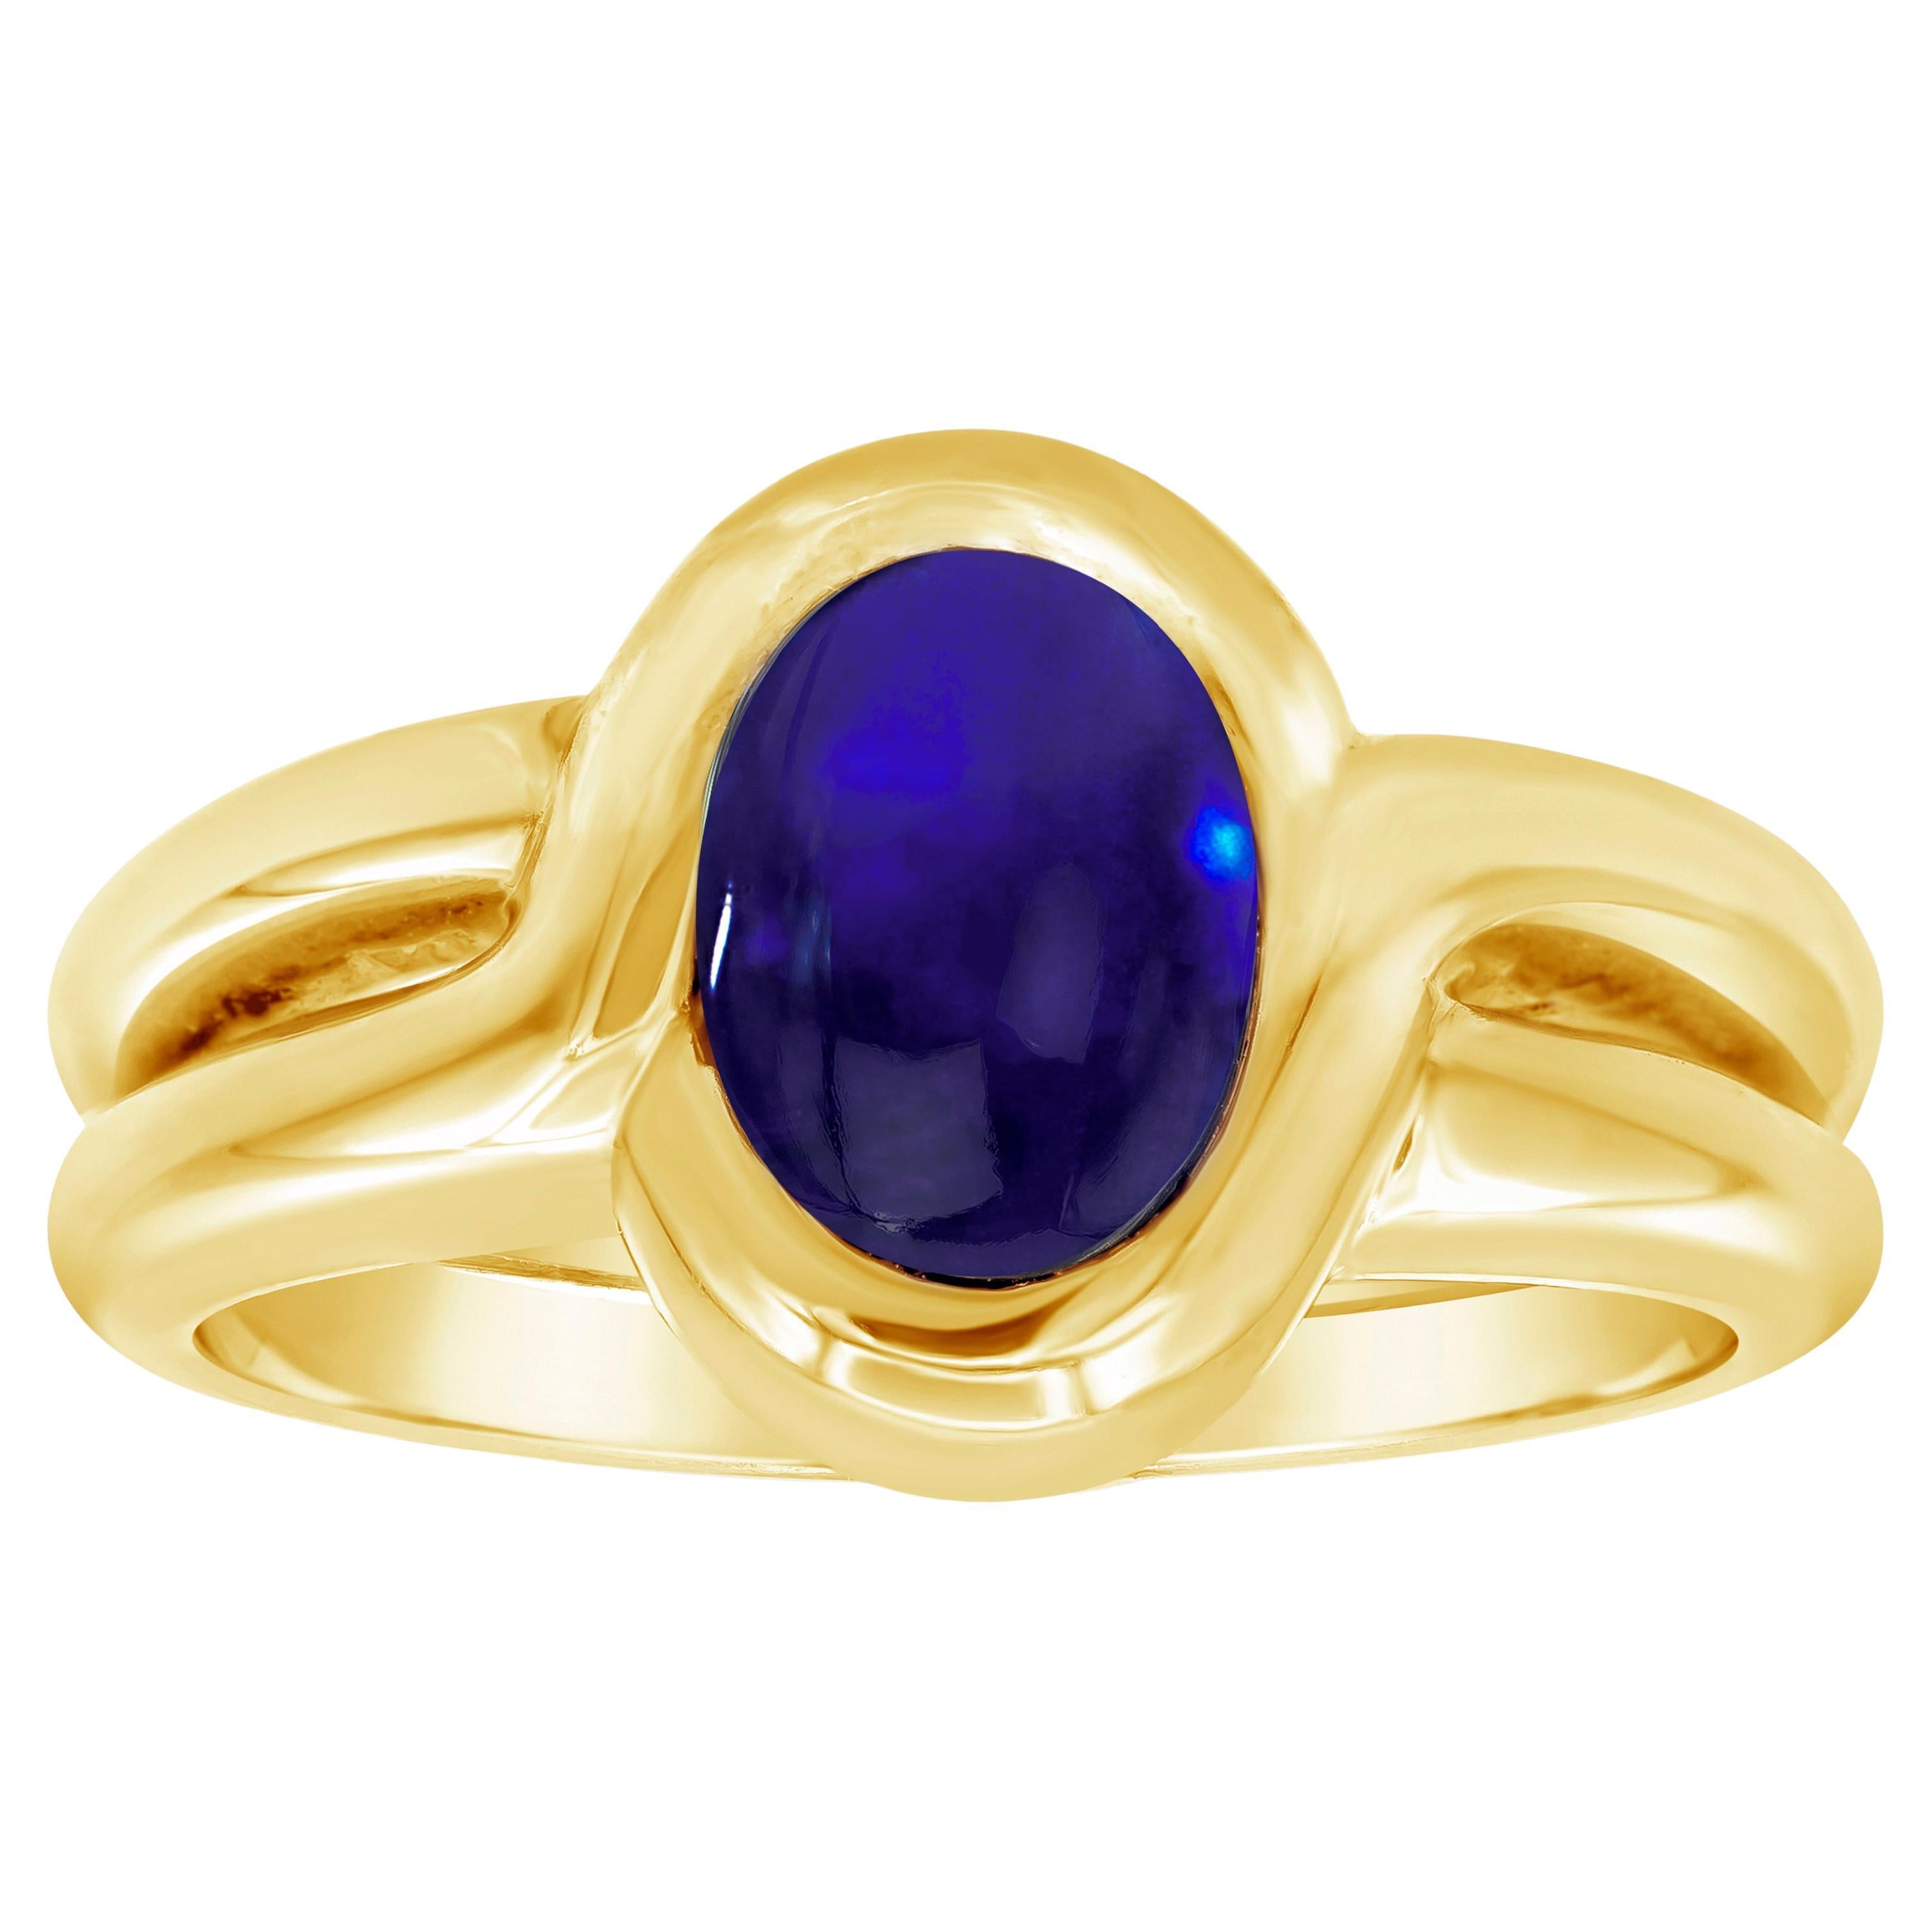 2.50 Carats Oval Cut Cabochon Sapphire Yellow Gold Double Shank Fashion Ring 